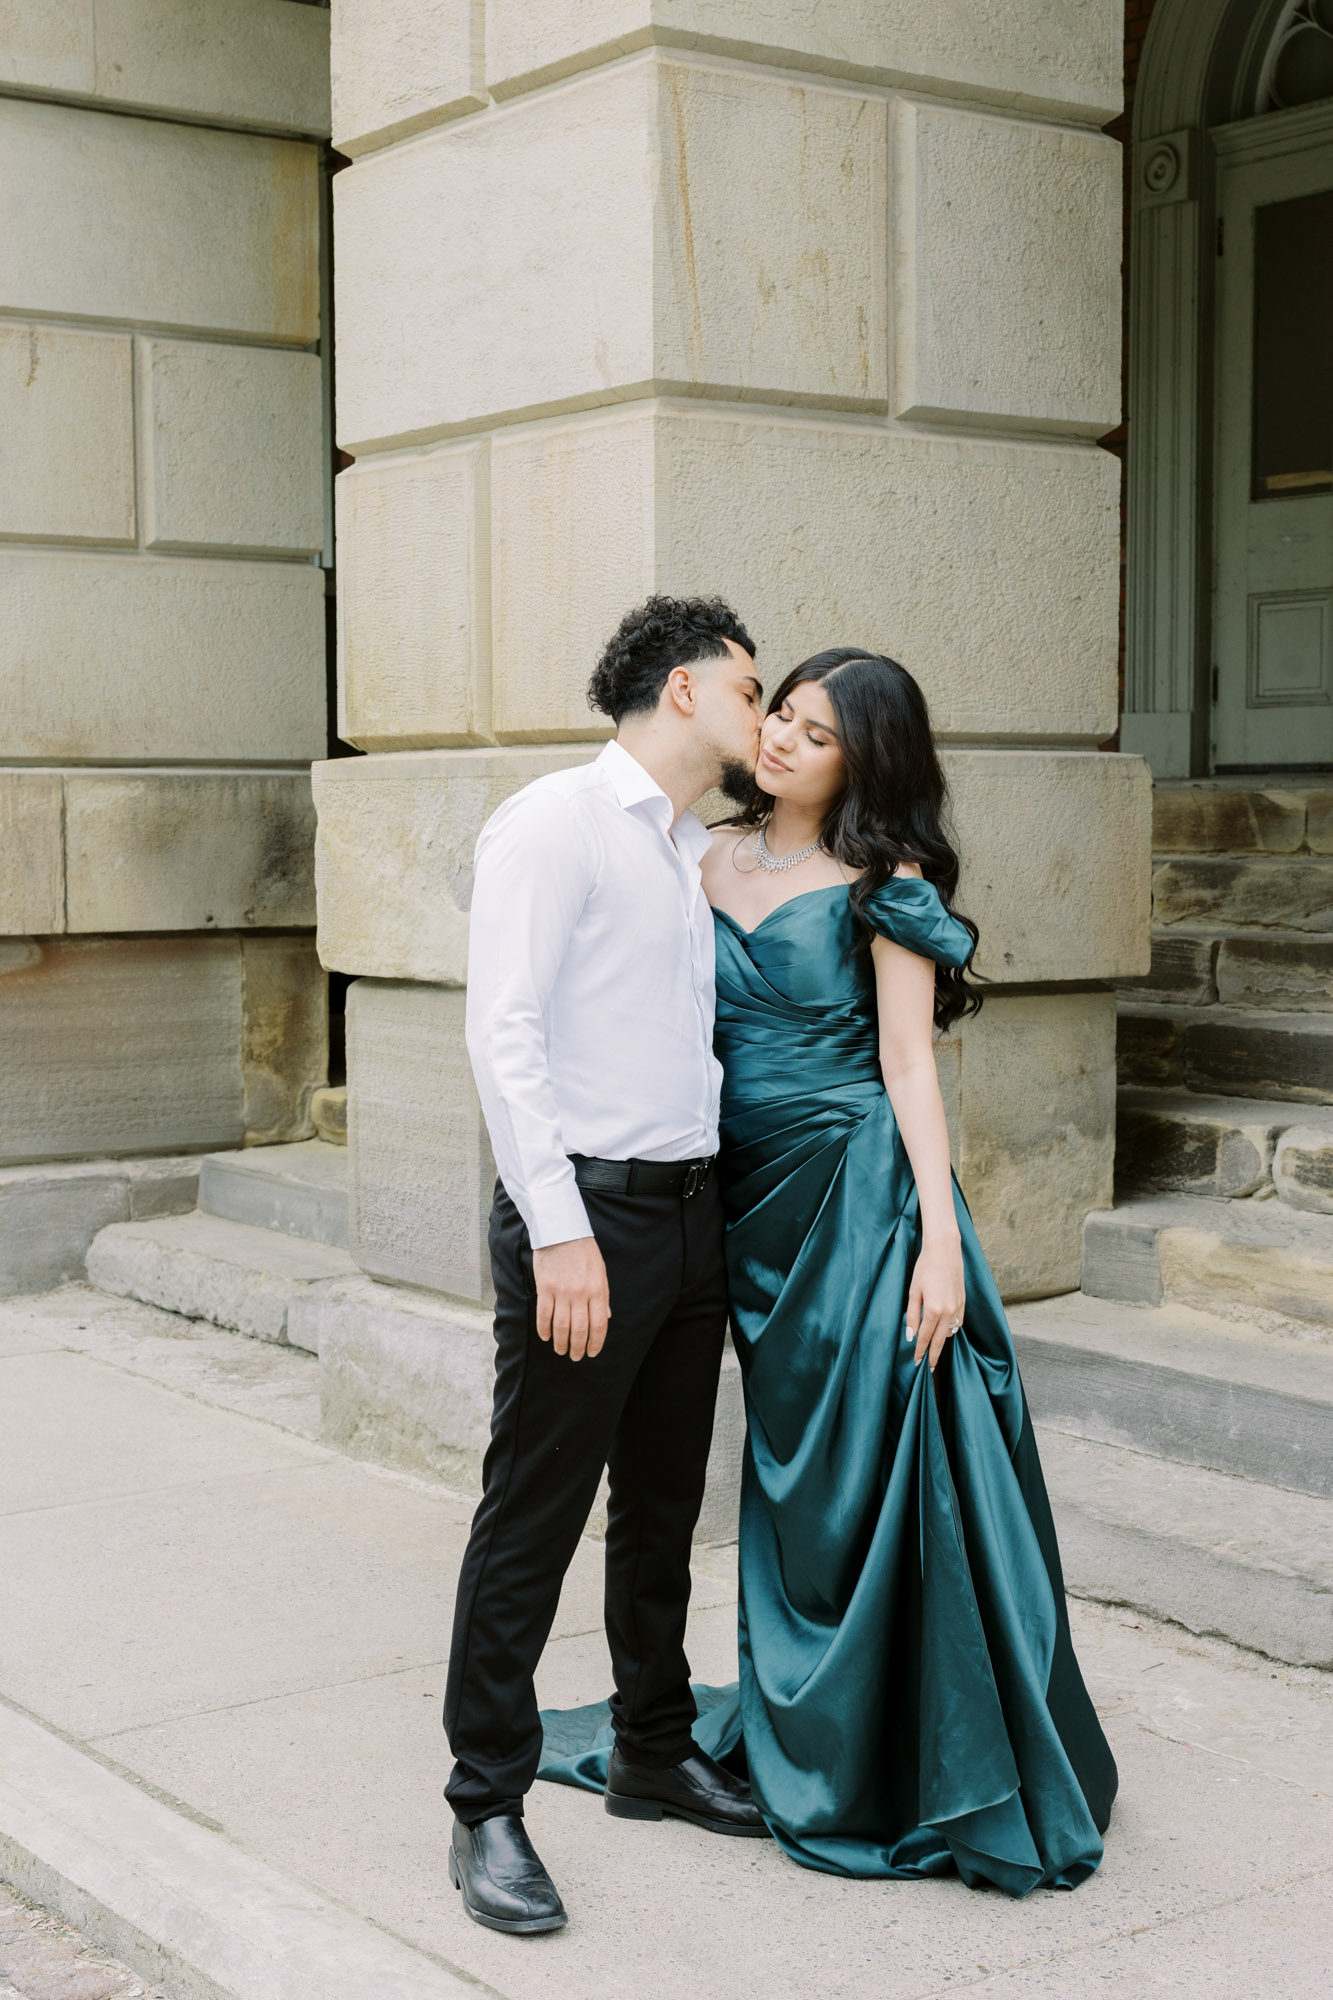 Man kissing fiancé on the cheek at engagement session